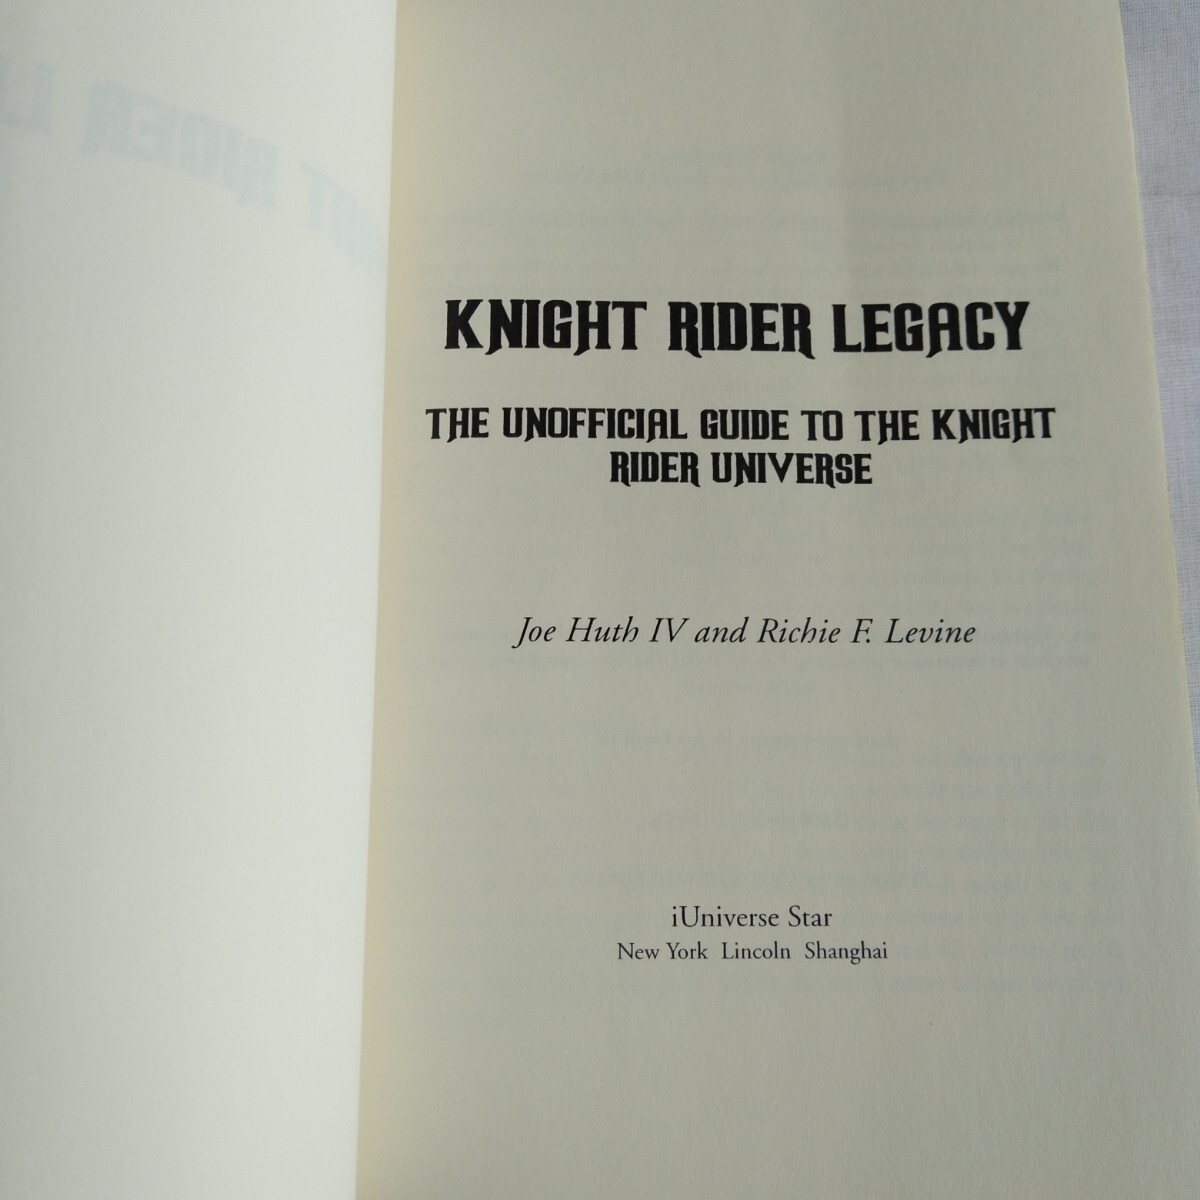 R153 Joe F. Huth Knight Rider Legacy: The Unofficial Guide to the Knight Rider Universe ナイト ライダー レガシー 洋書 本 雑誌の画像6